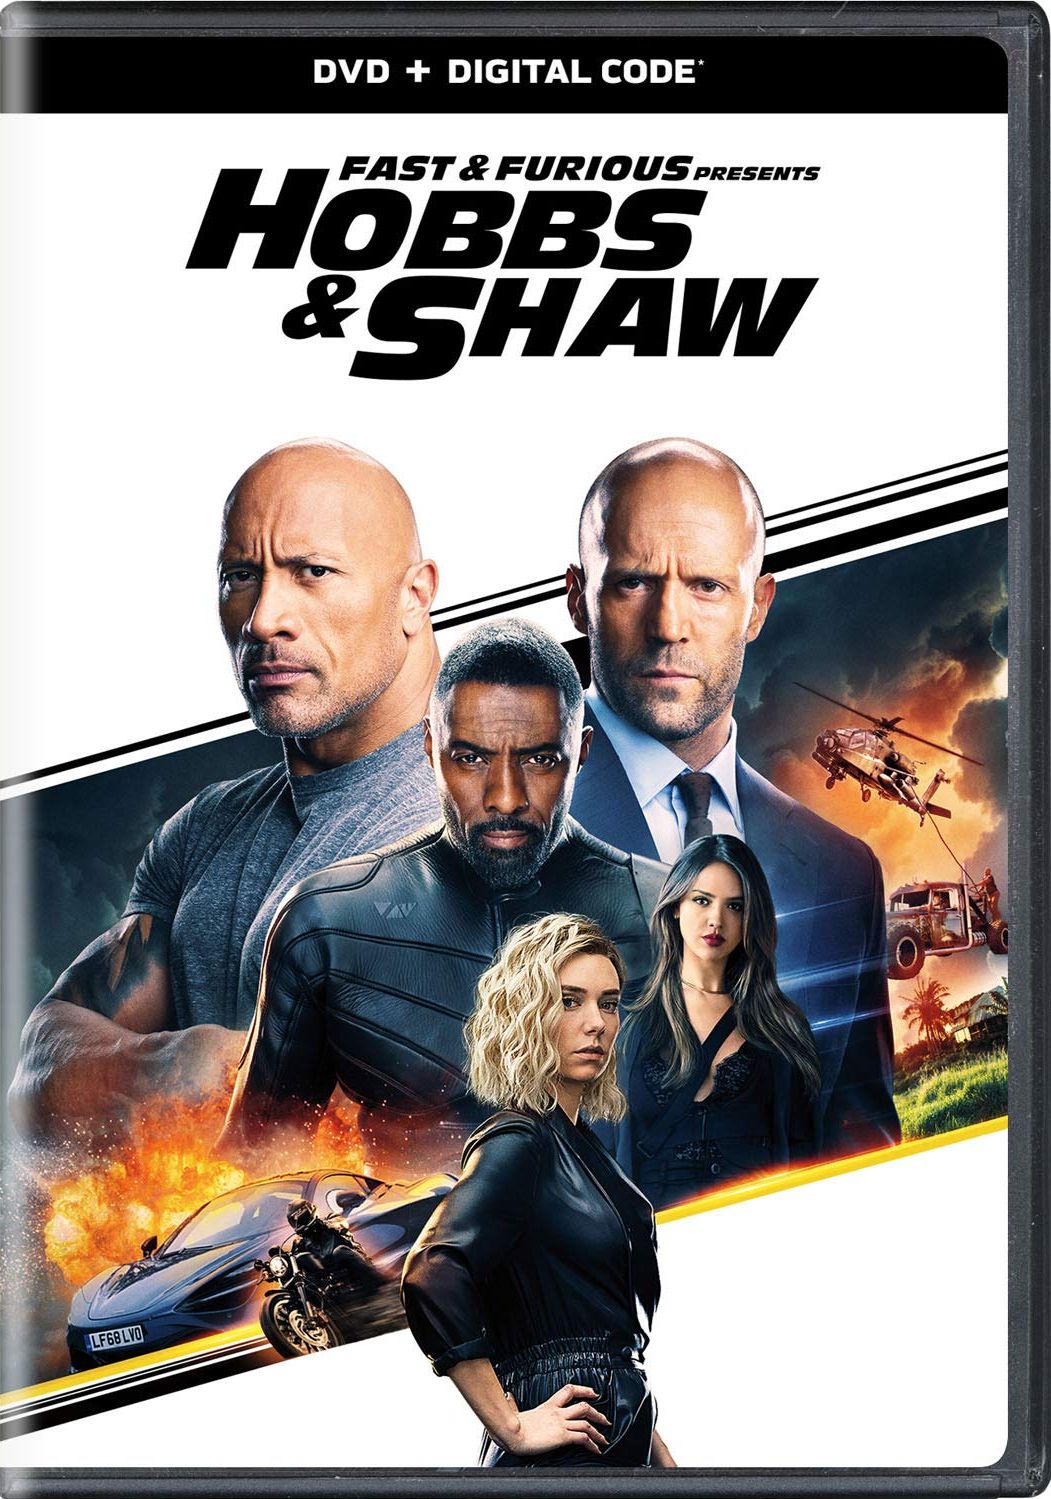 Fast & Furious Presents: Hobbs & Shaw DVD Release Date November 5, 20191051 x 1499